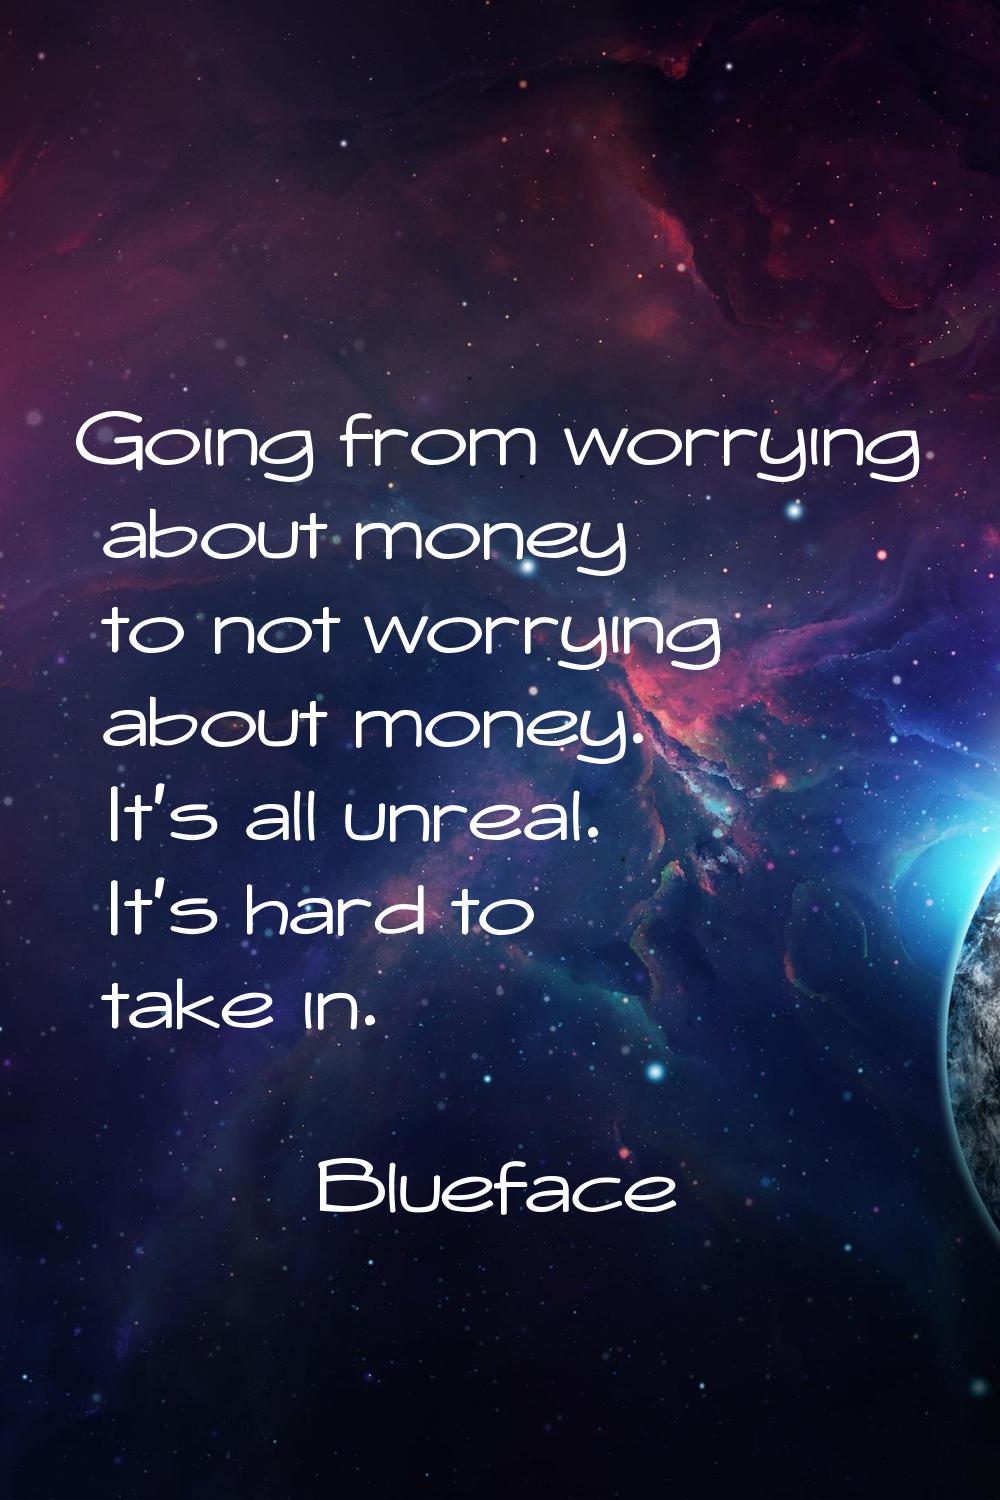 Going from worrying about money to not worrying about money. It's all unreal. It's hard to take in.